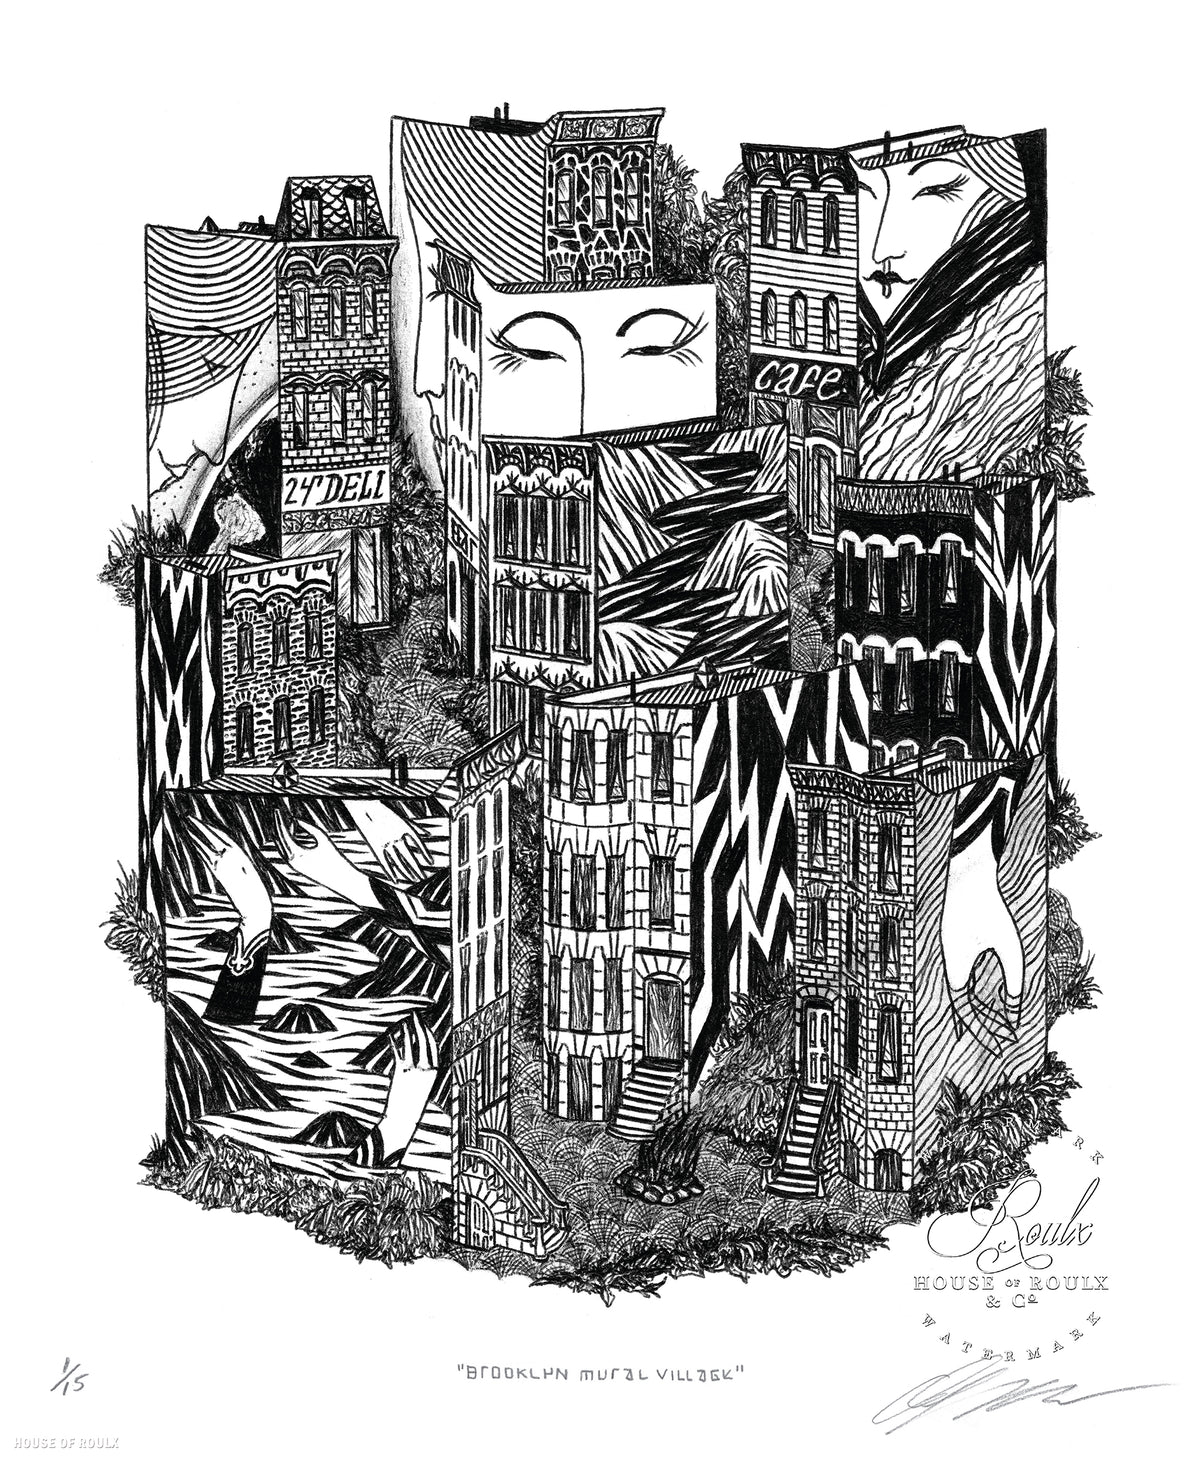 Hydeon &quot;Brooklyn Mural Village&quot; - Limited Edition, Archival Print - 14 x 17&quot;